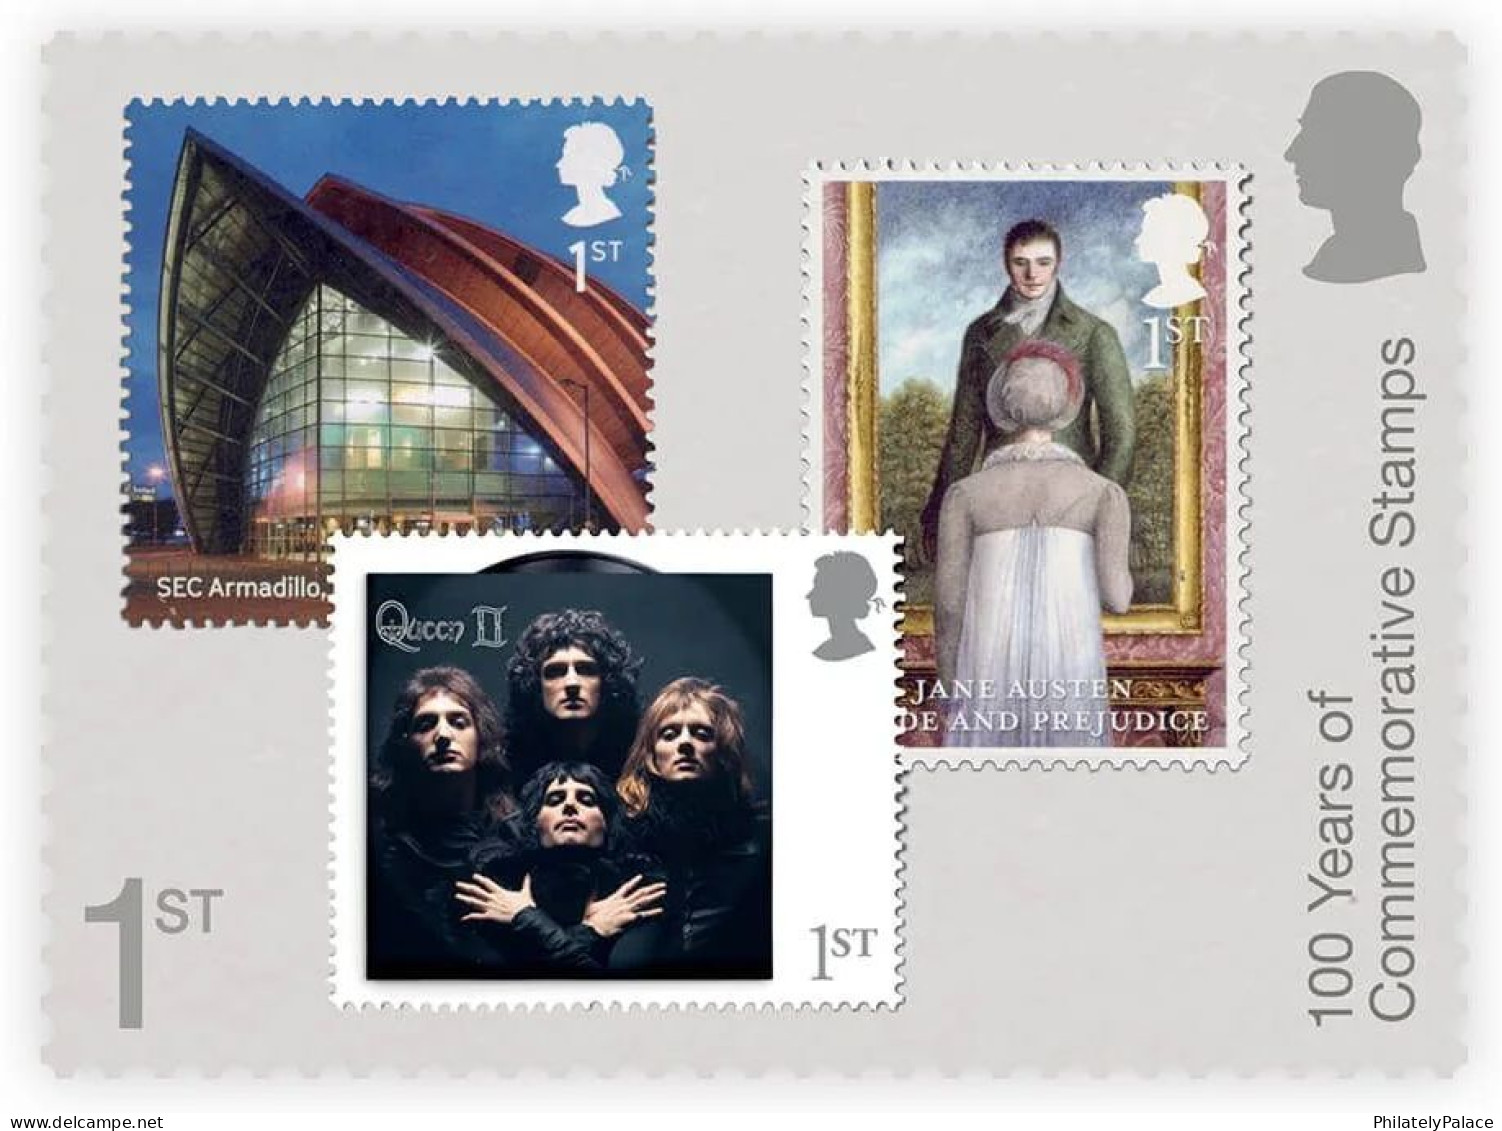 Great Britain (UK) New 2024 ,Stamp on Stamp, Lion,Queen,Butterfly,Flower,Music,Architecture, FDC Cover+ Brochure (**)